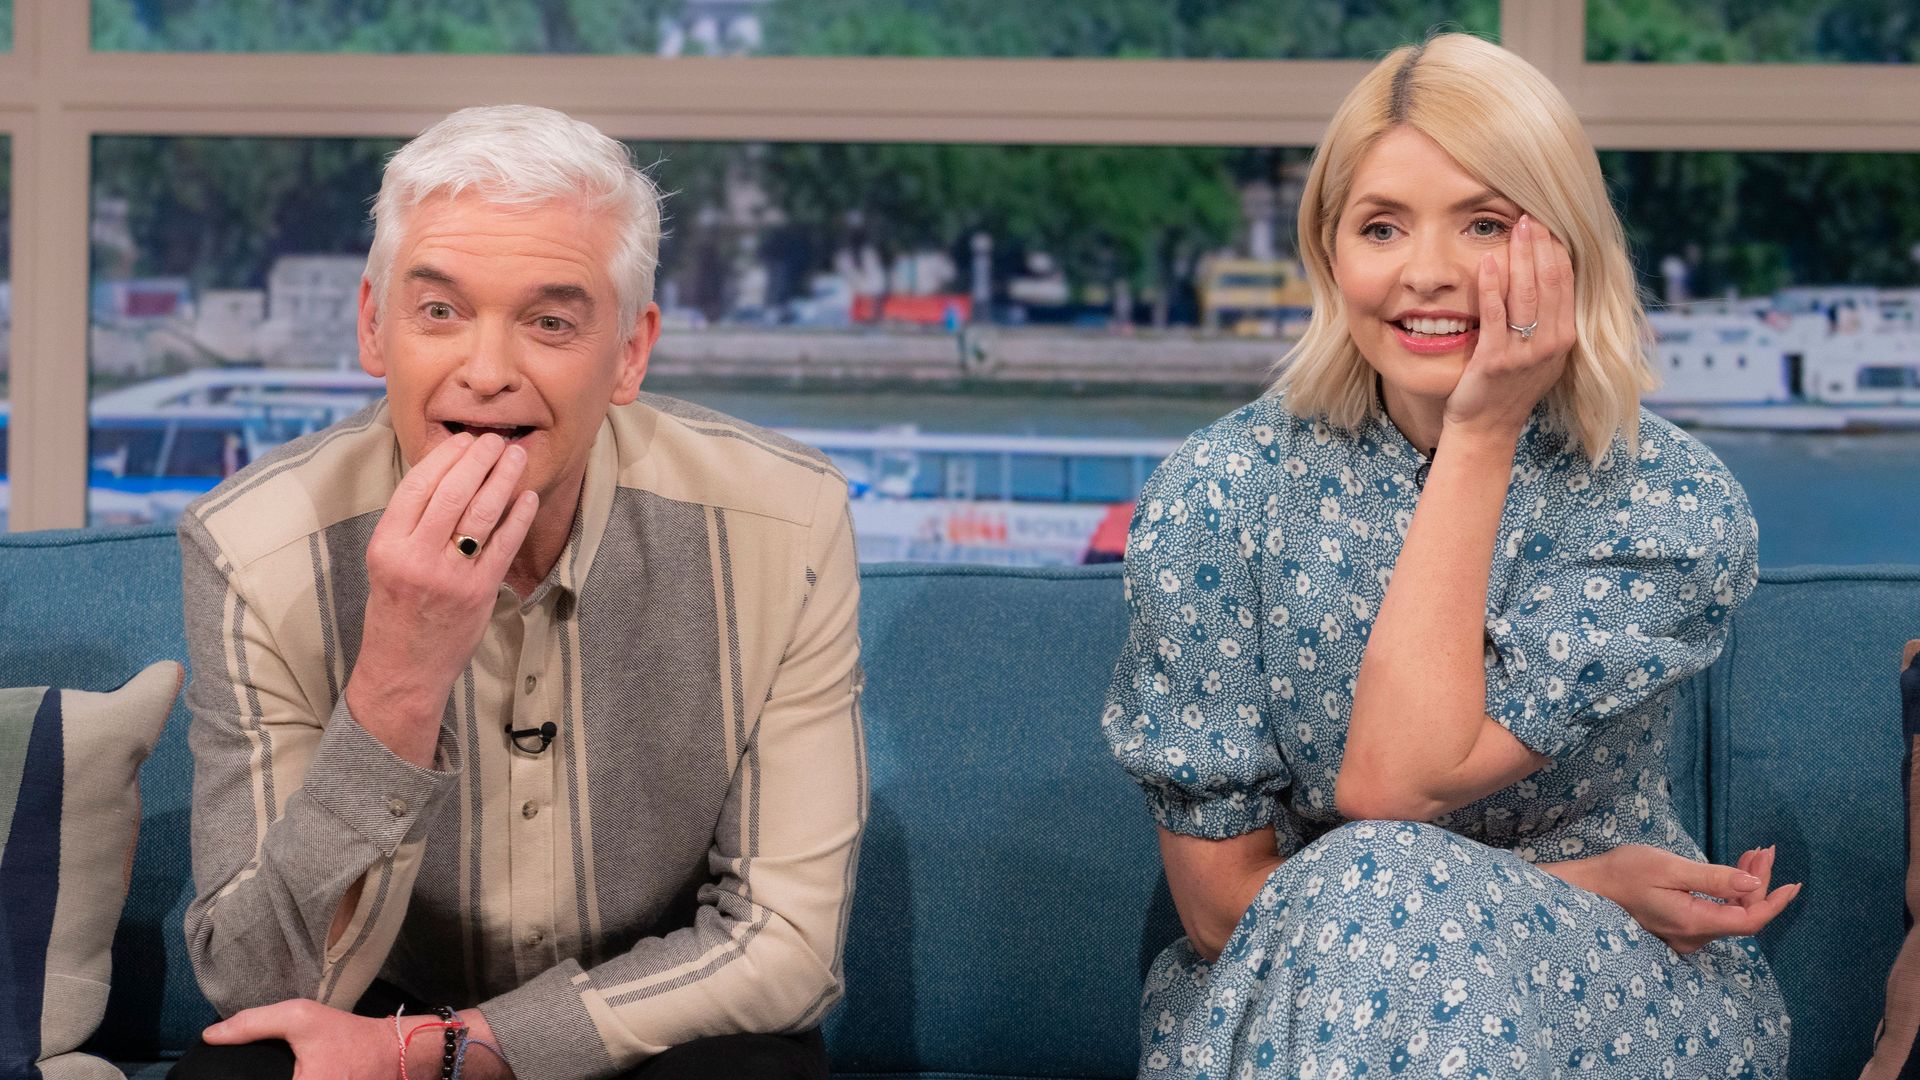 Phillip Schofield and Holly Willoughby on the set of This Morning